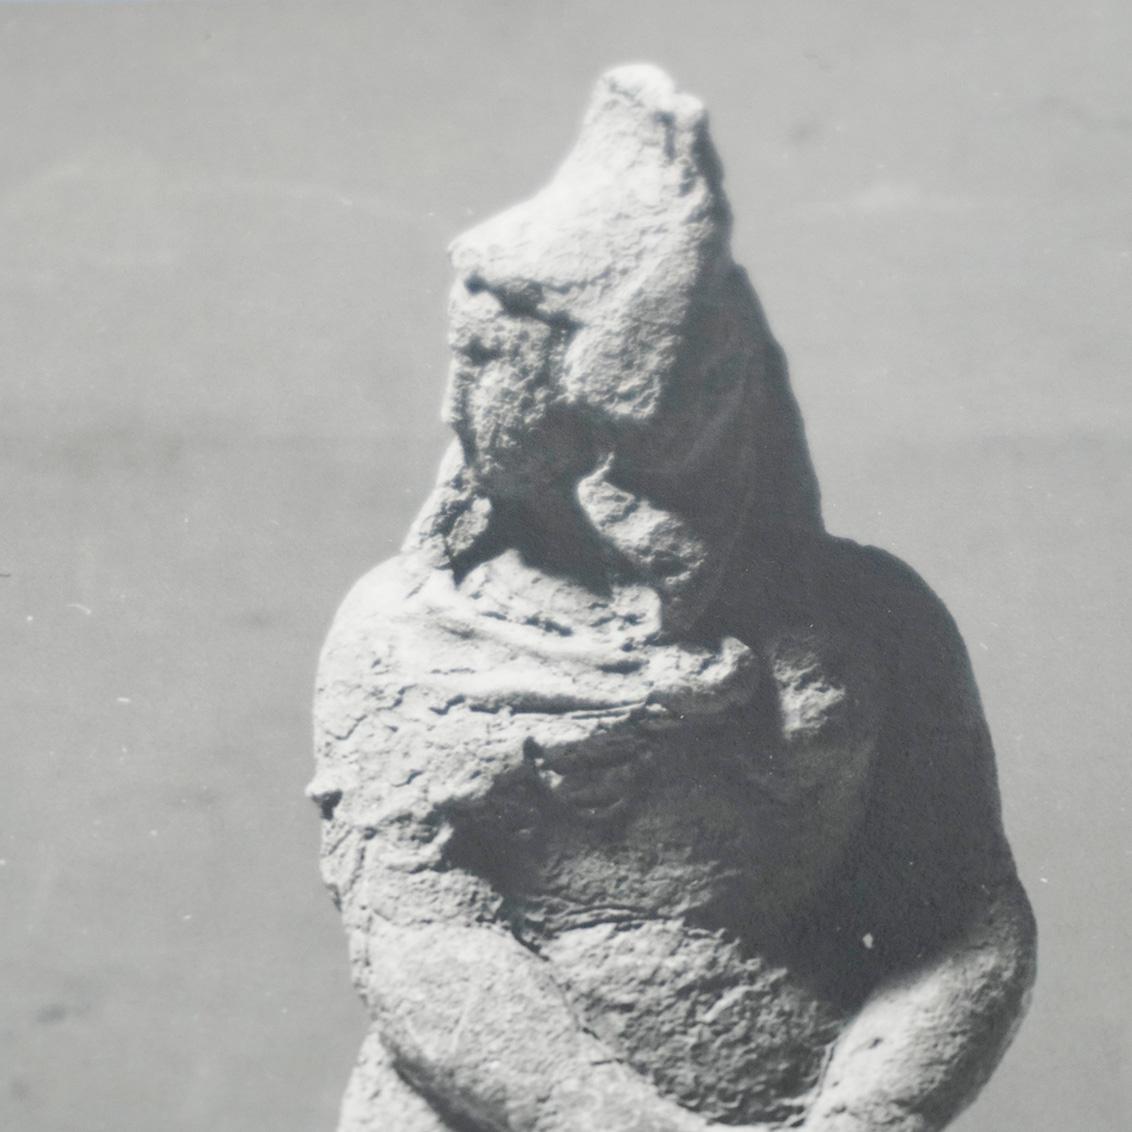 Glass Manolo Hugue Archive Photography of Sculpture, circa 1960 For Sale